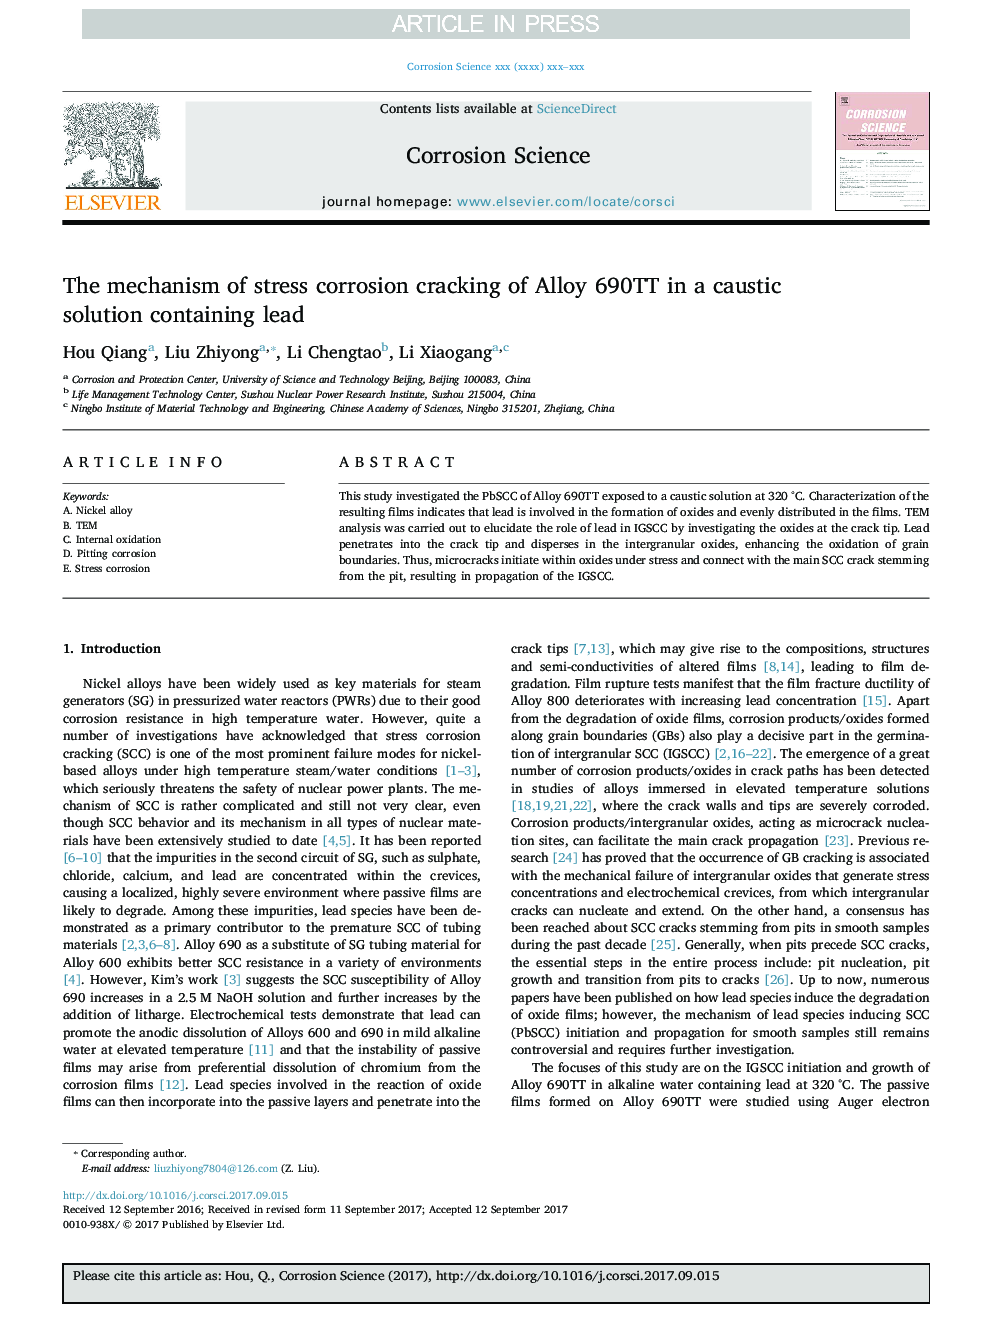 The mechanism of stress corrosion cracking of Alloy 690TT in a caustic solution containing lead